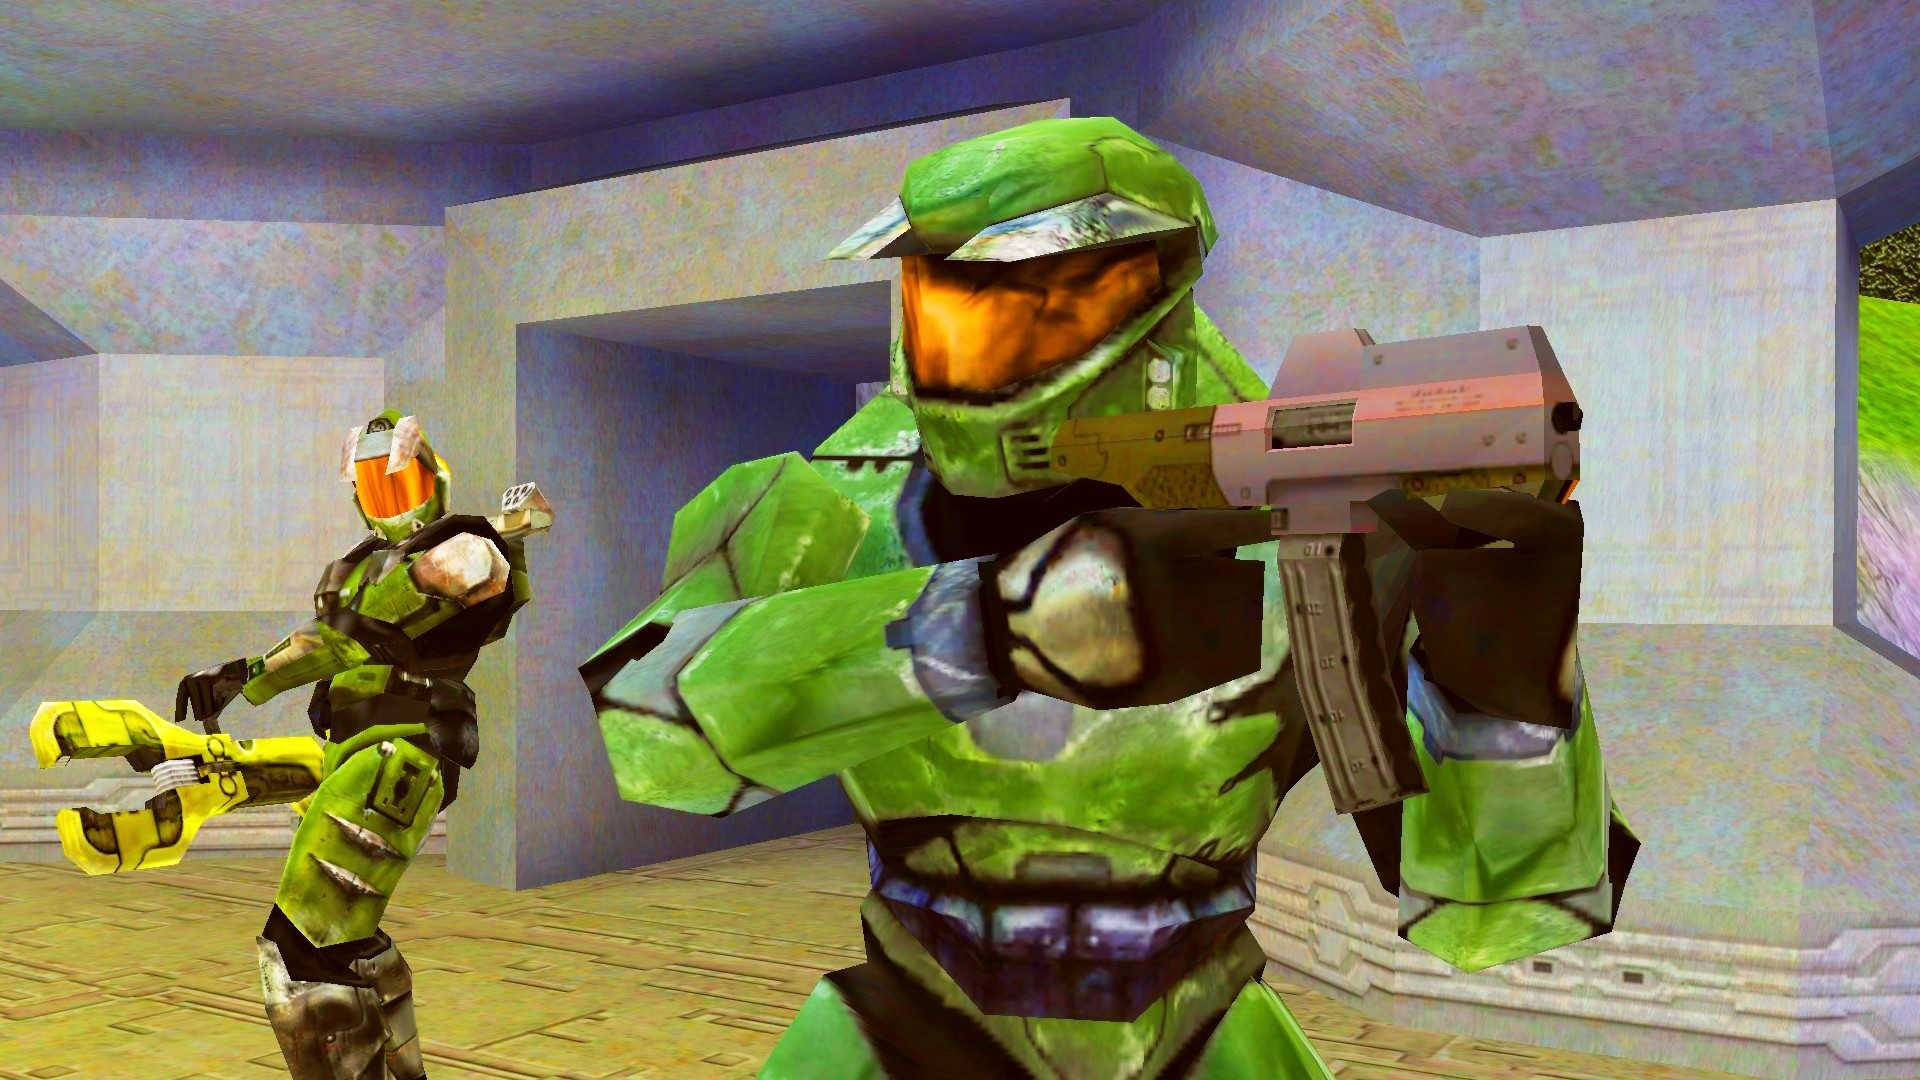 Original Halo RTS from 1999 is being restored by 343 Industries